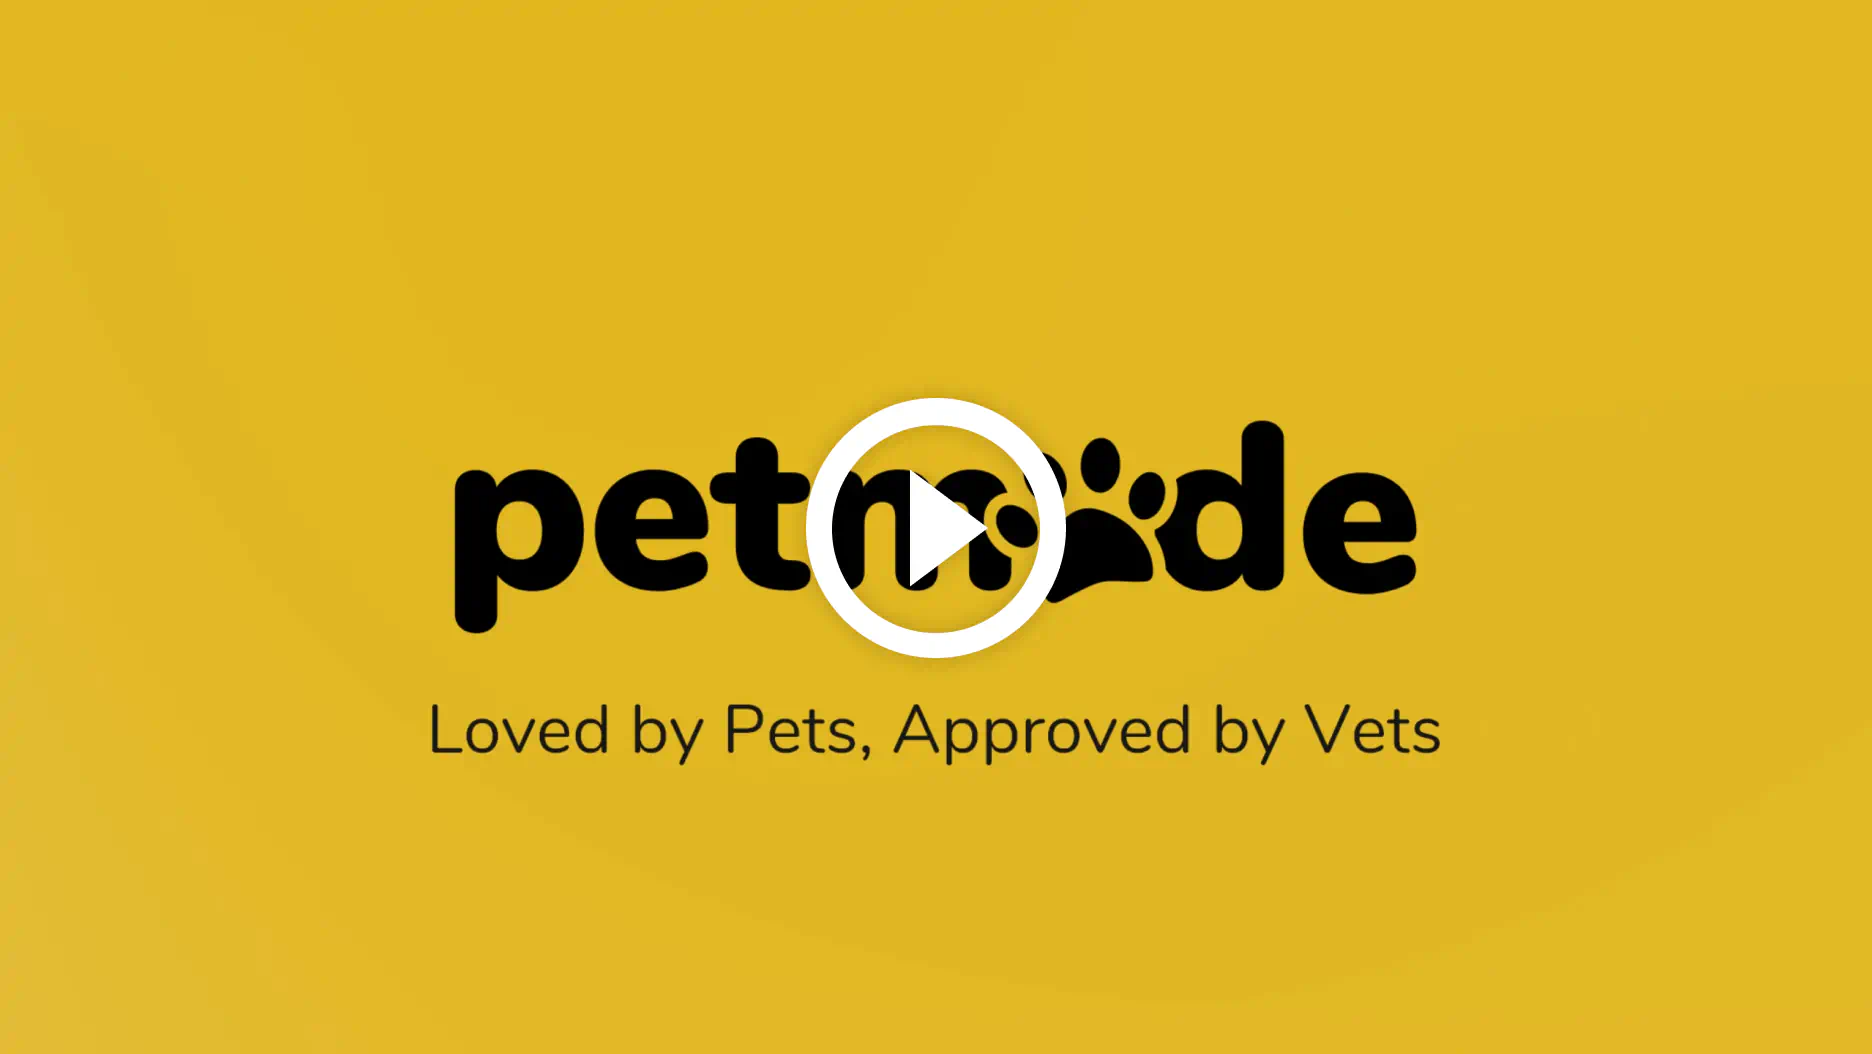 Loved by Pets, Approved by Vets